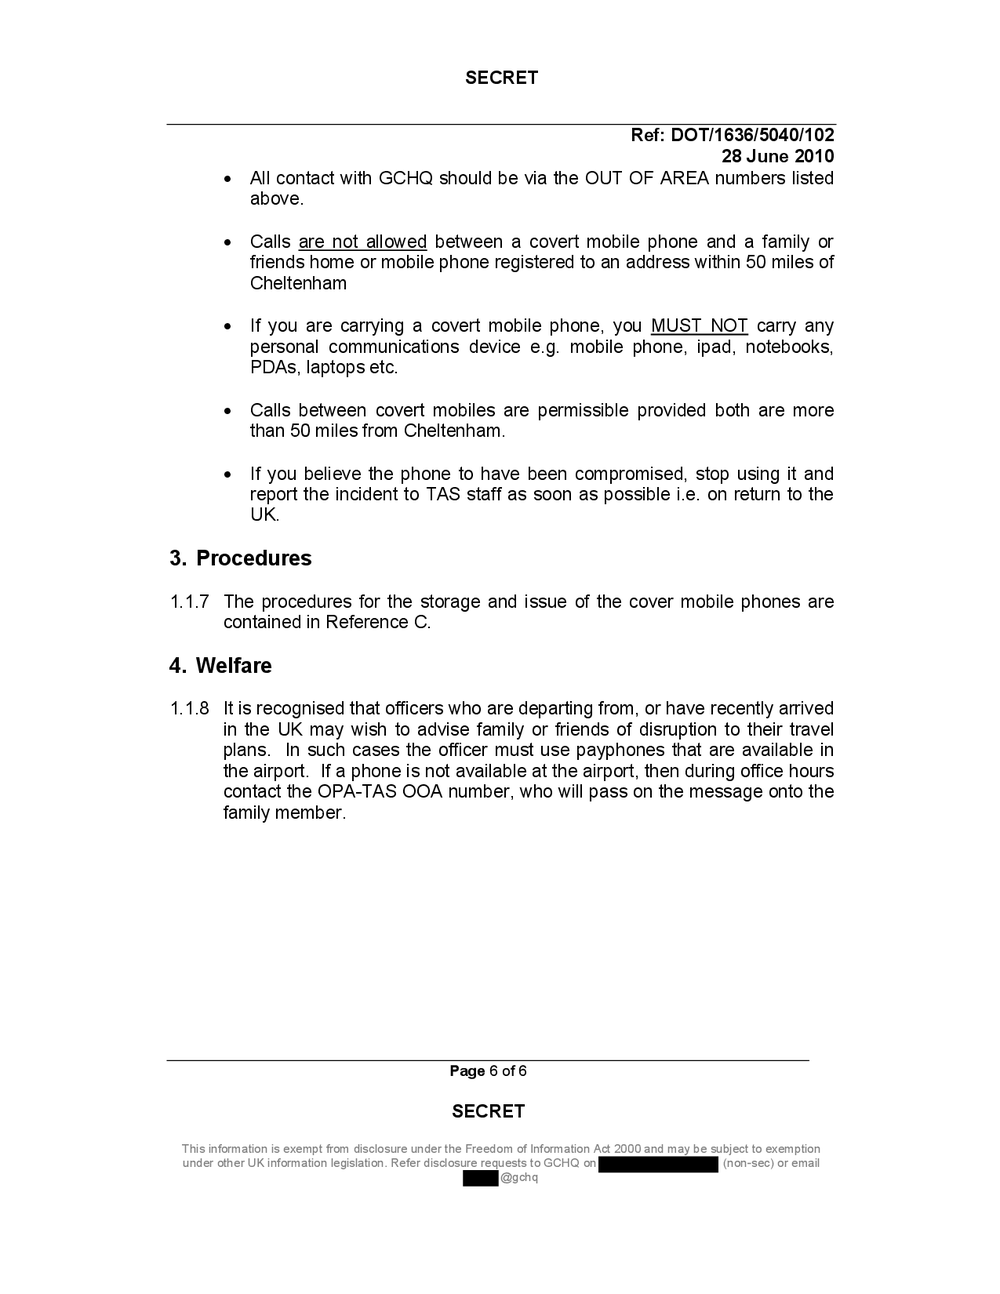 Page 6 from GCHQ Covert Mobile Phones Policy